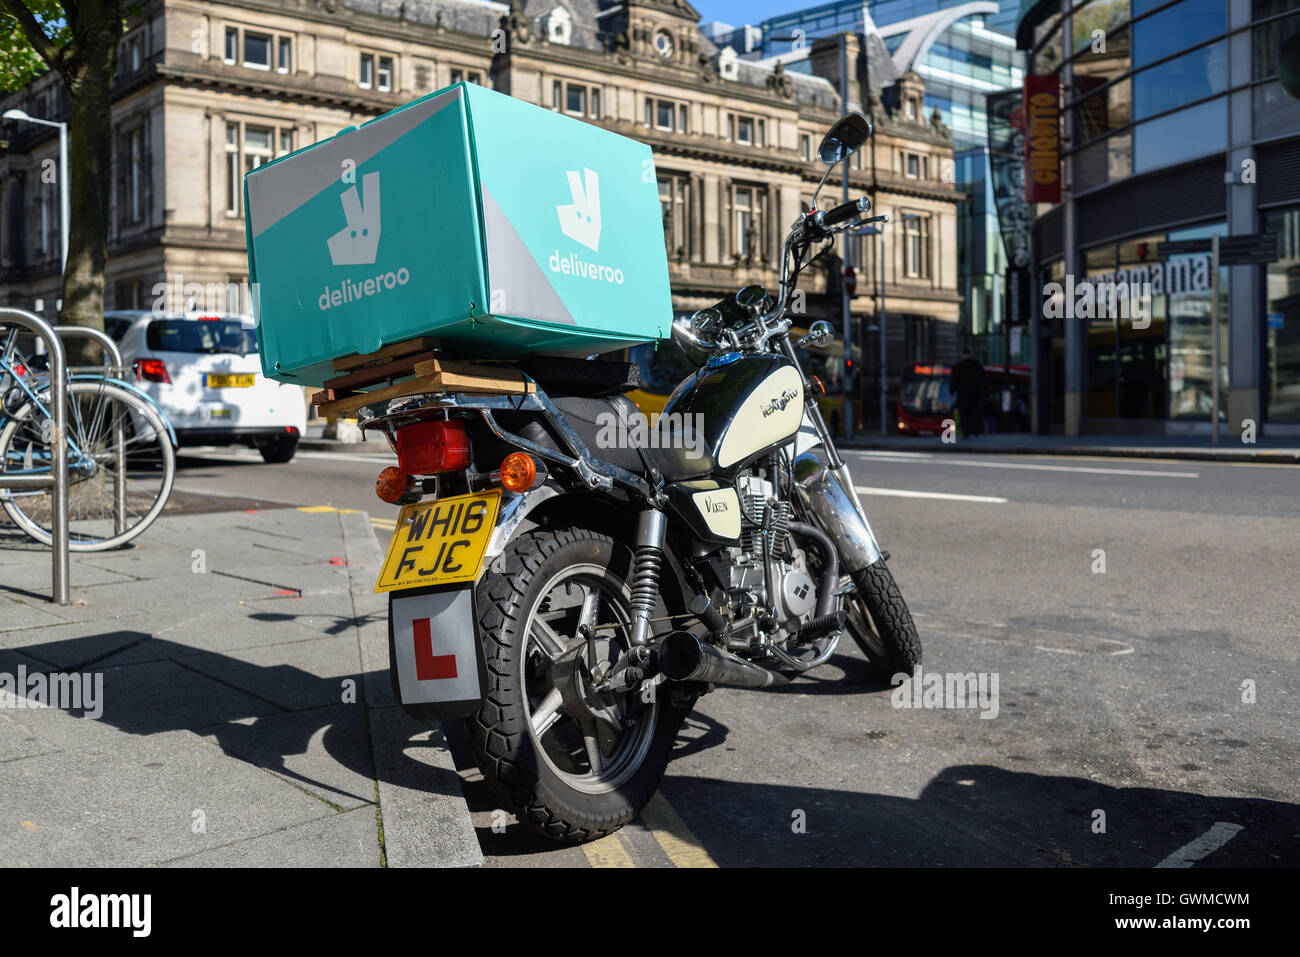 Deliveroo Food Courier Delivery Services. Stock Photo